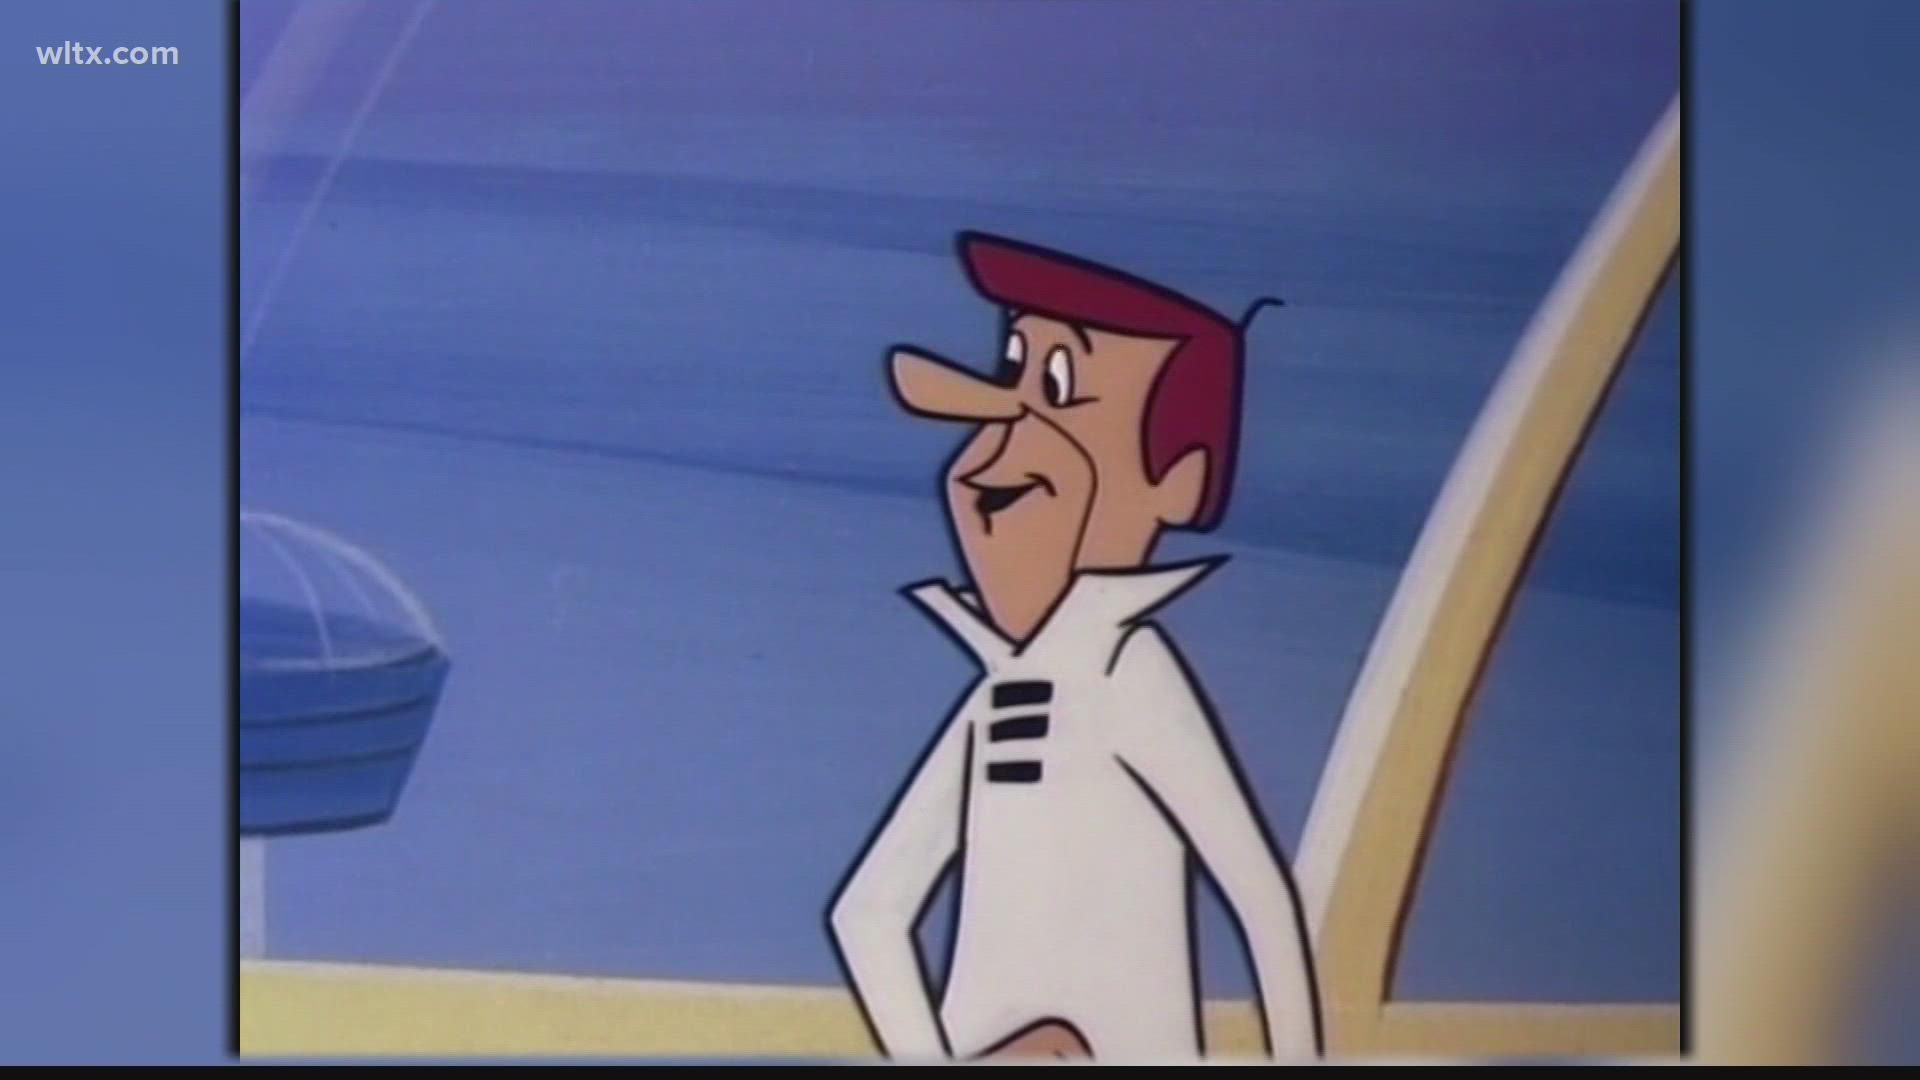 Fan page suggests George Jetson born today - July 31, 2022 